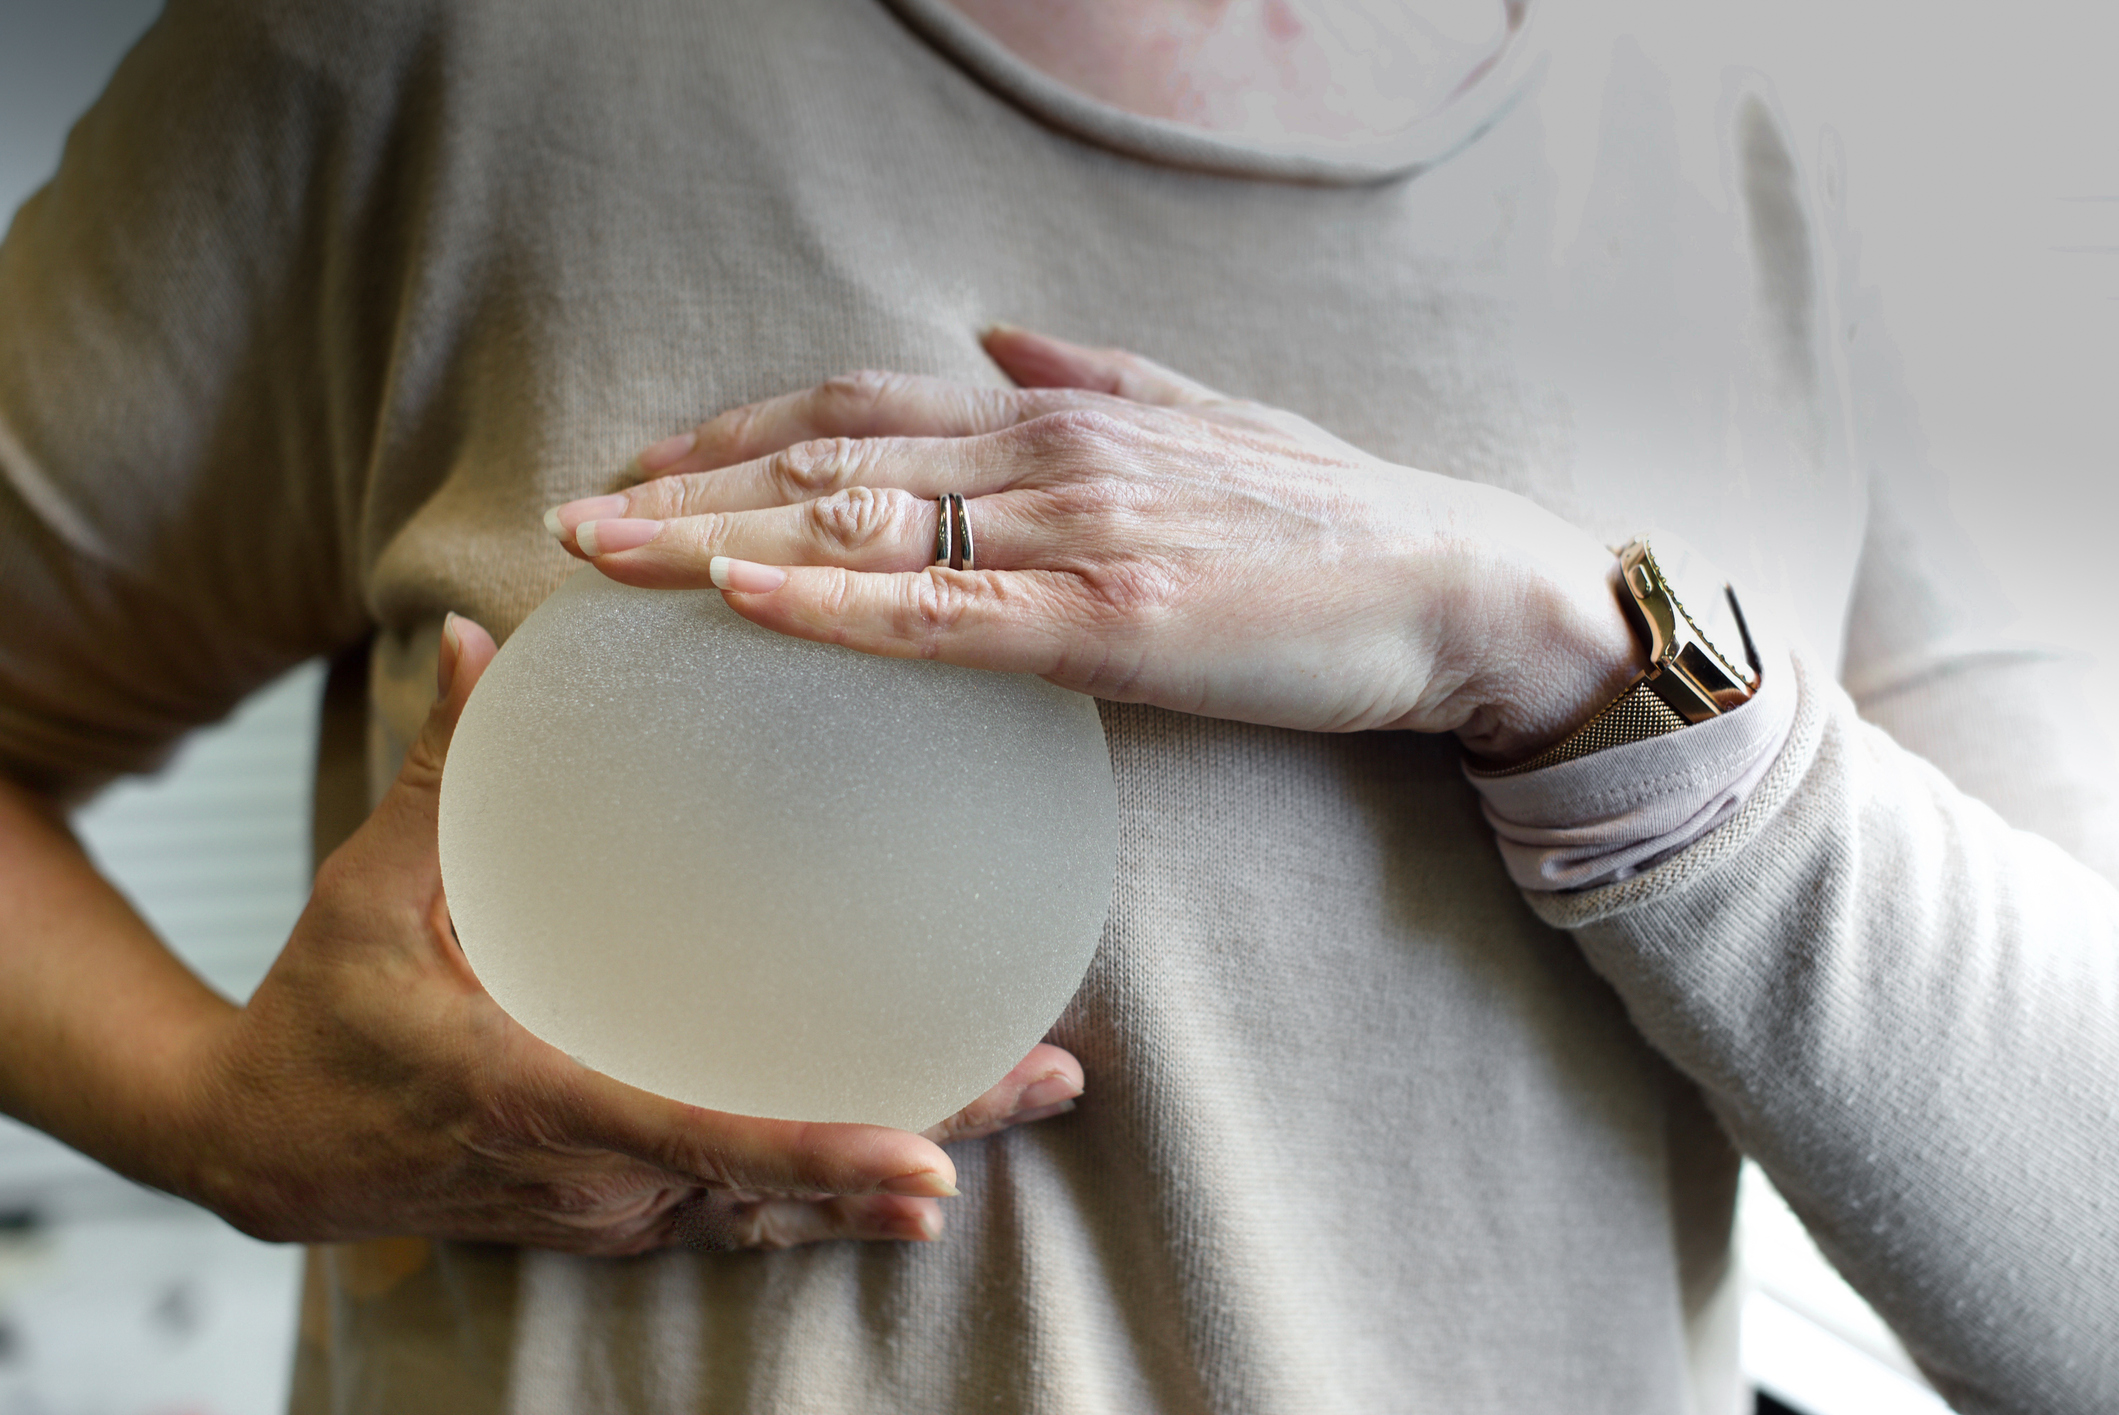 FDA Issues New Warning of Cancers Linked to Breast Implants